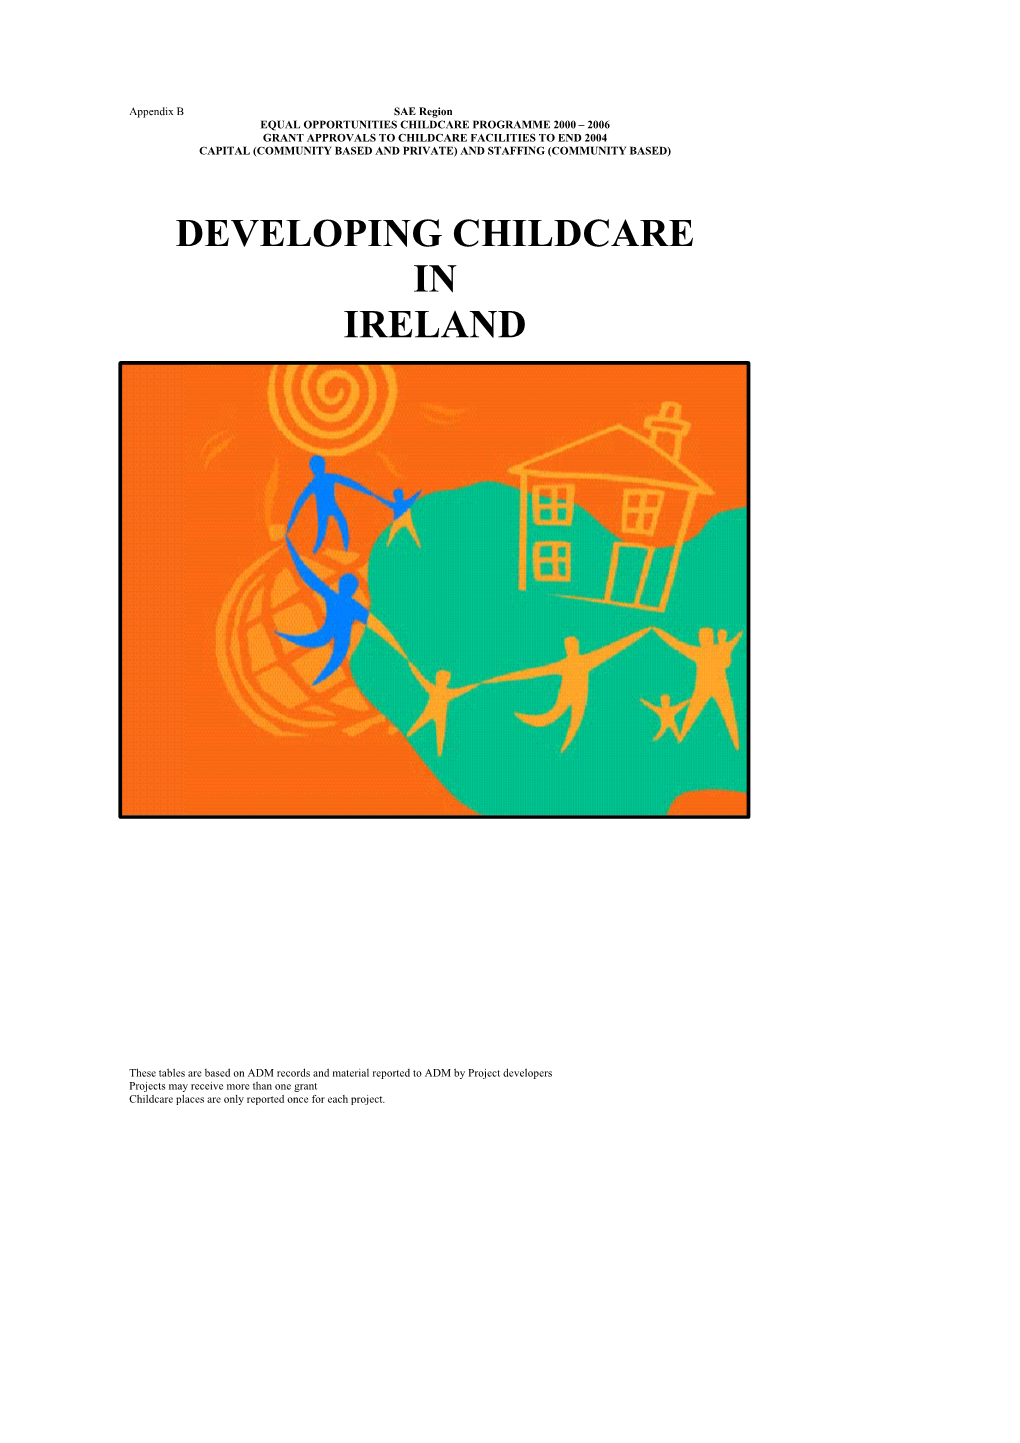 Region of Developing Childcare in Ireland As Published in June 2004